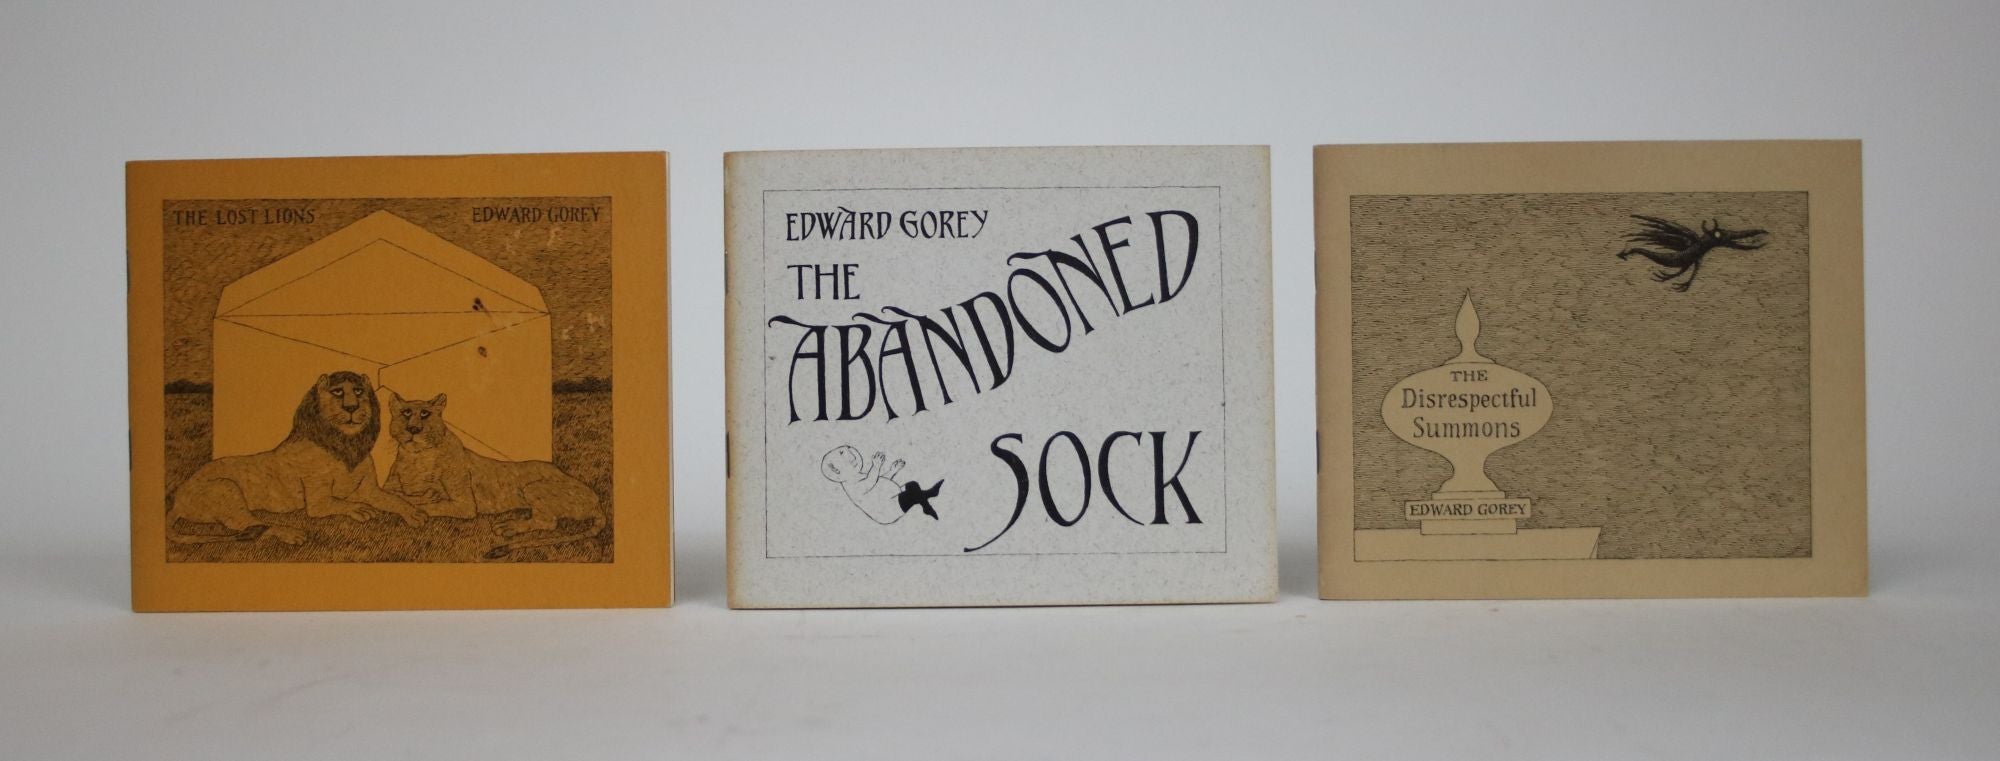 Fantod IV: 3 Books from Fantod Press. The Abandoned Sock, The Disrespectful  Summons, and the Lost Lions by Edward Gorey on Minotavros Books